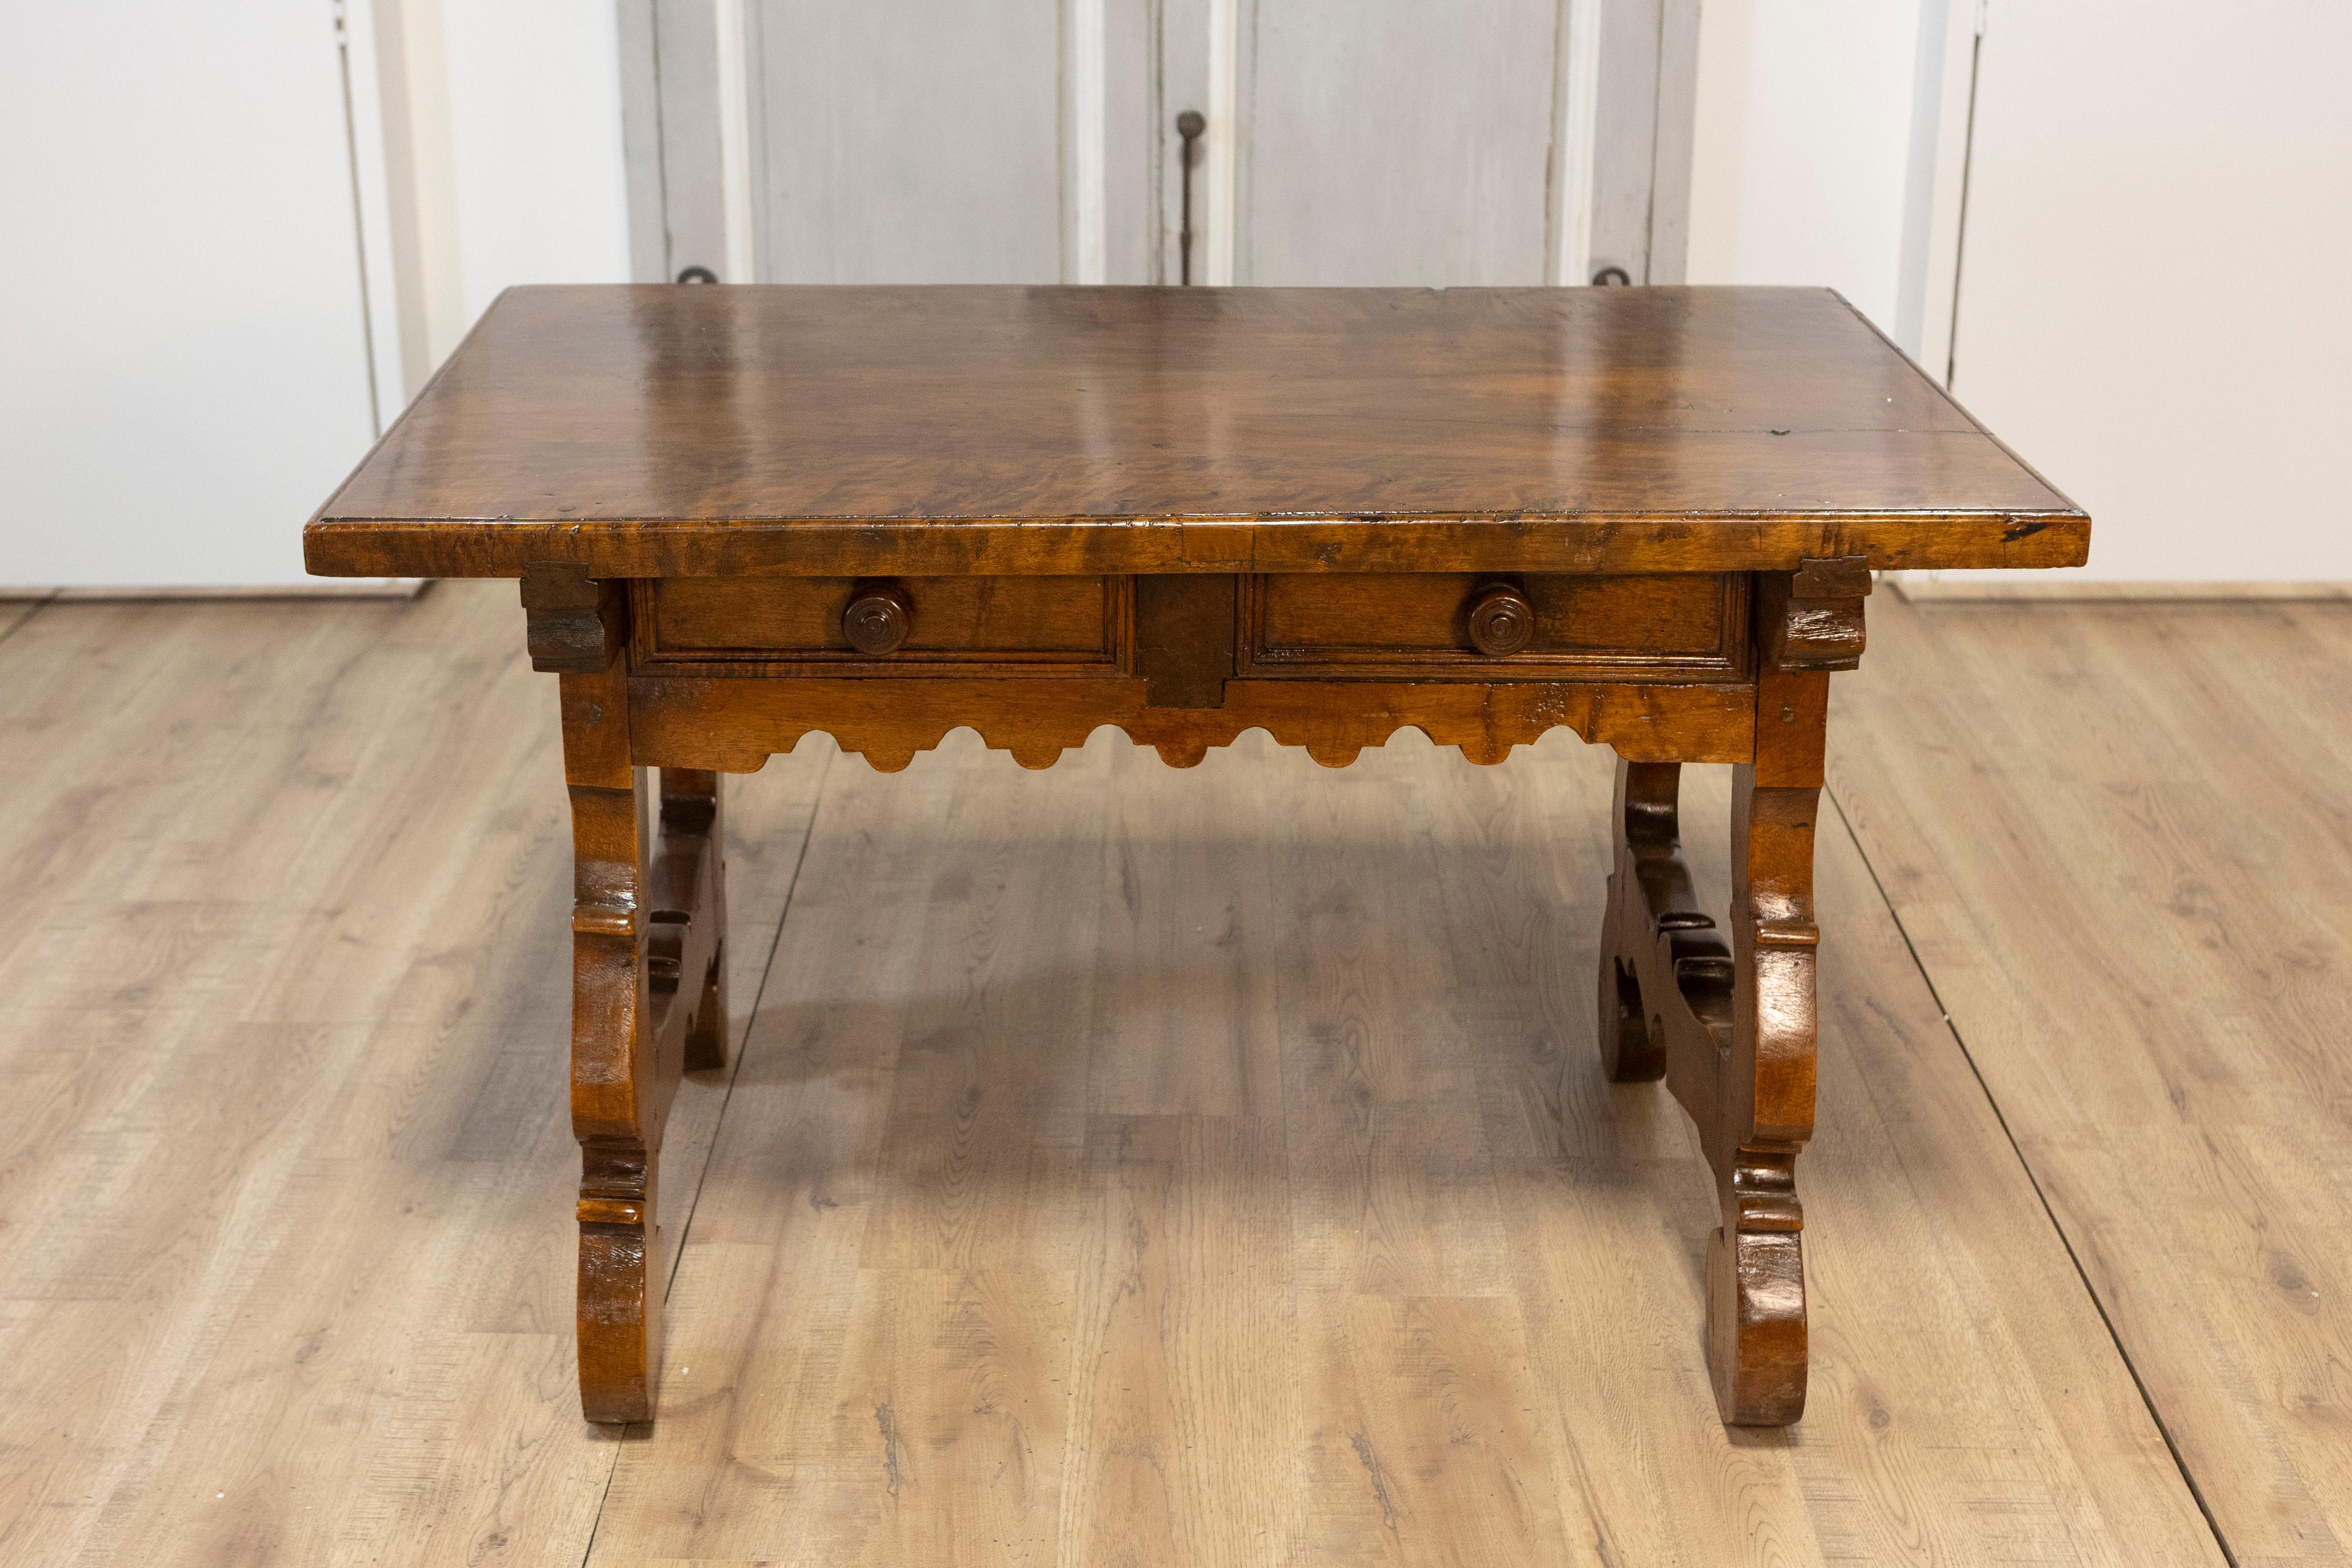 An Italian Baroque style walnut Fratino table from the 19th century with carved lyre shaped legs and two drawers. This exquisite Italian Baroque style Fratino table from the 19th century is a striking piece of craftsmanship, beautifully marrying